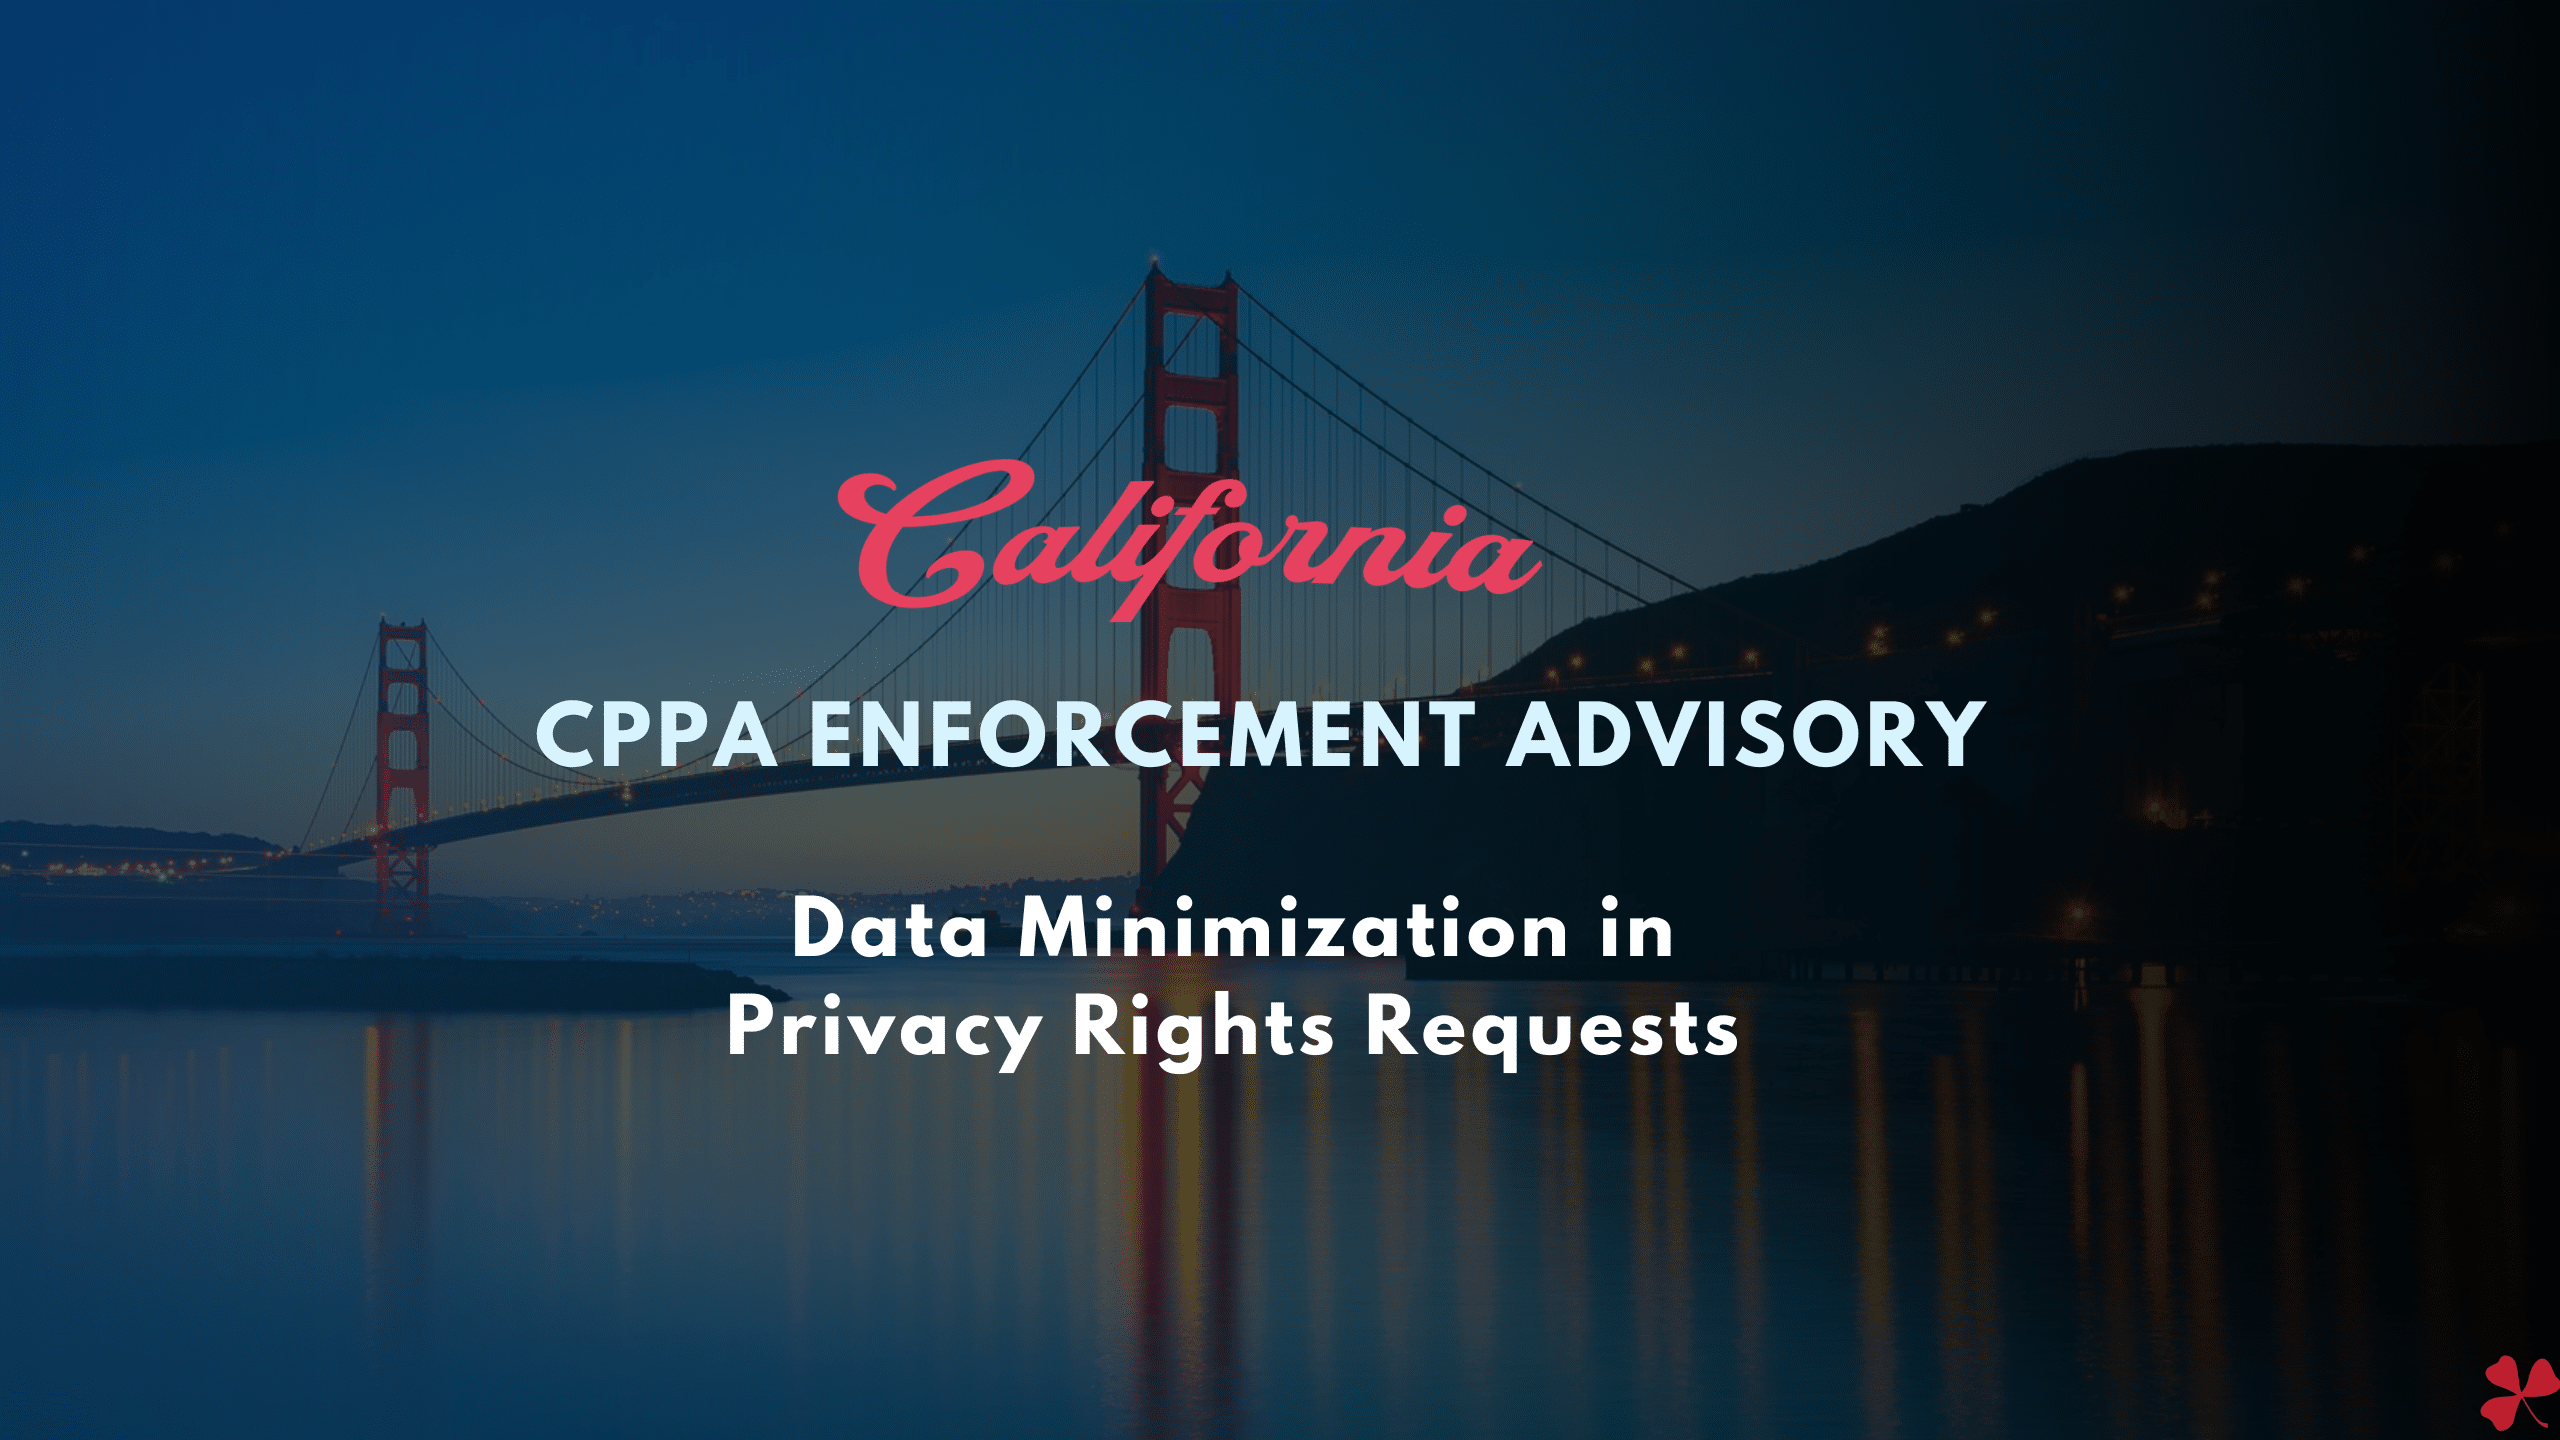 CPPA Enforcement Advisory: Data Minimization in Privacy Rights Requests